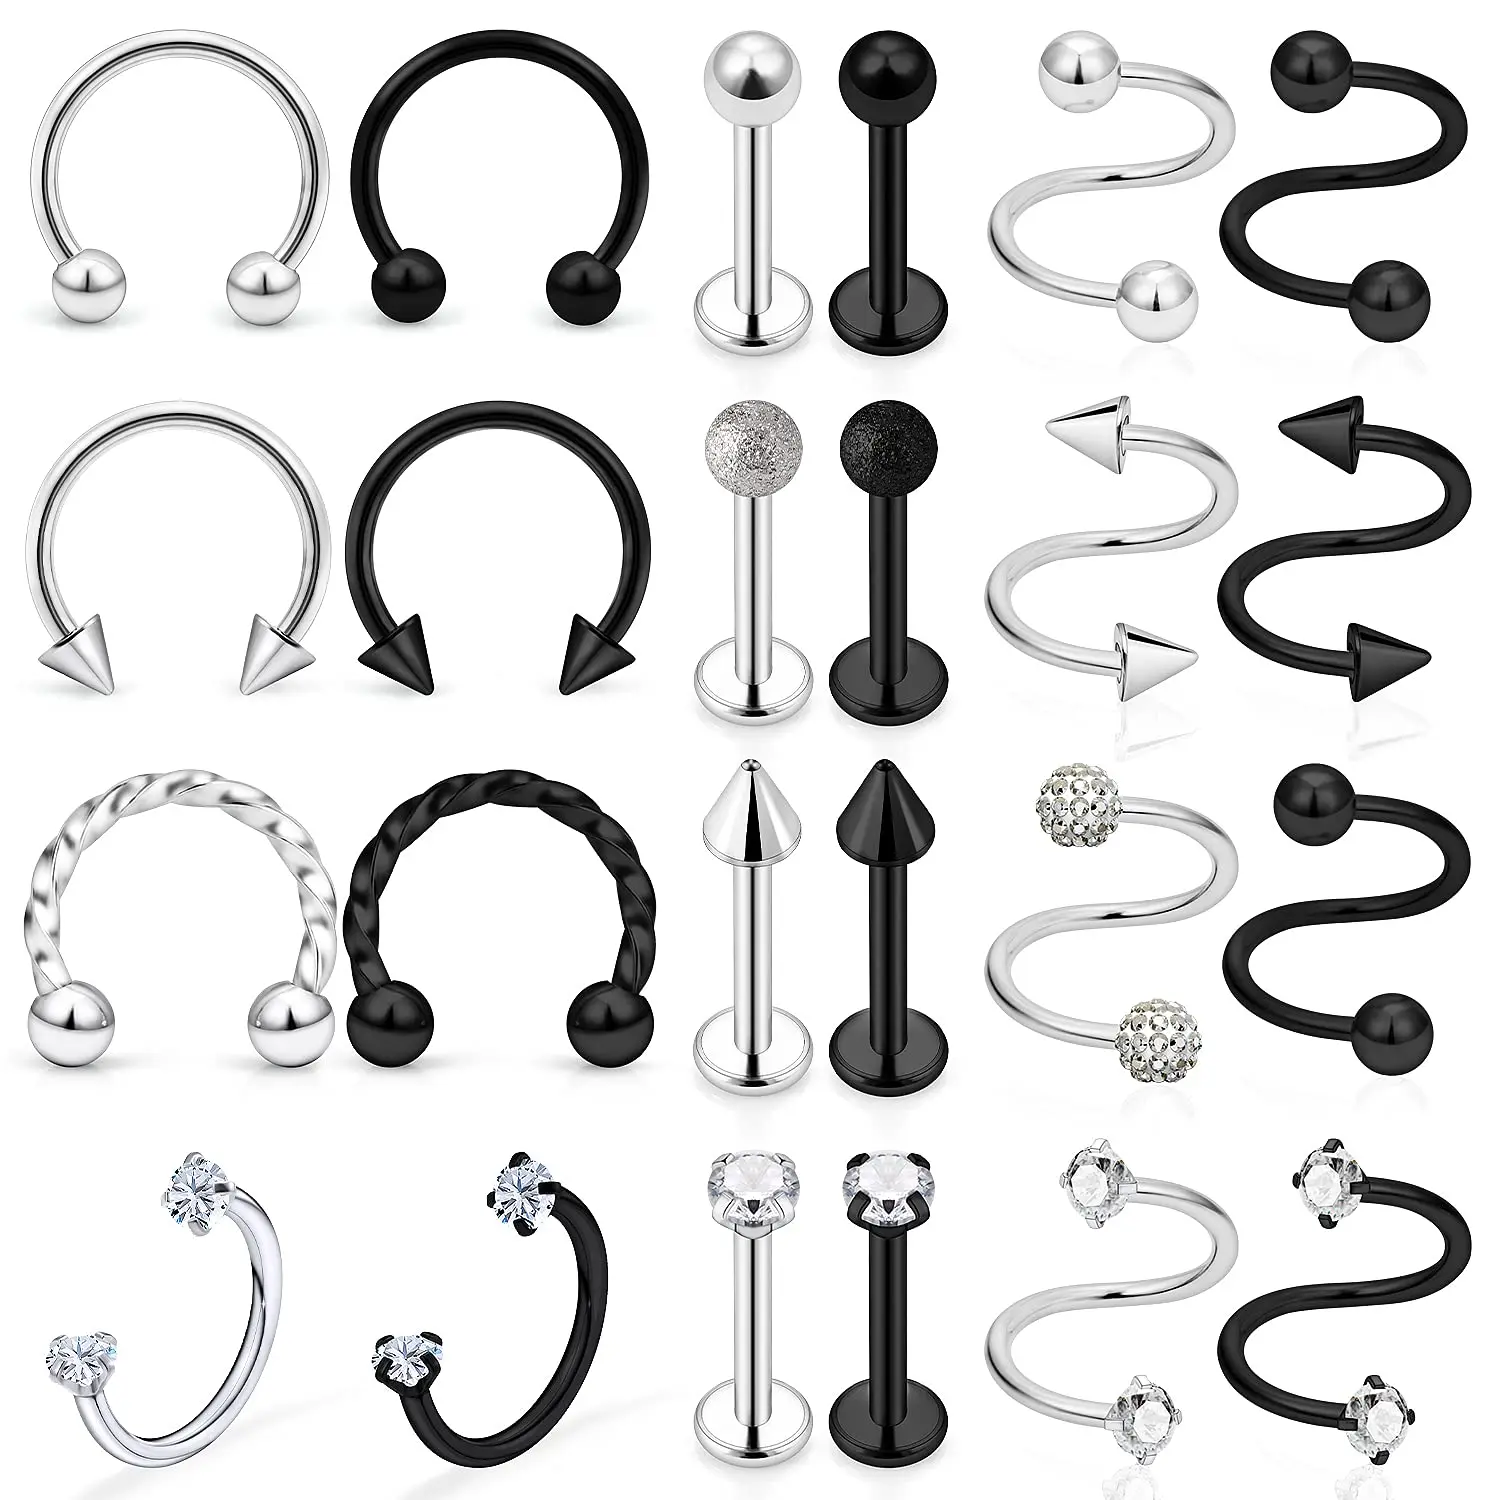 

24Pcs Mixed Style 16G Lip Ring Studs Piercing Jewelry Surgical Steel Tragus Horseshoe Septum Ring Twist Helix Cartilage Piercing